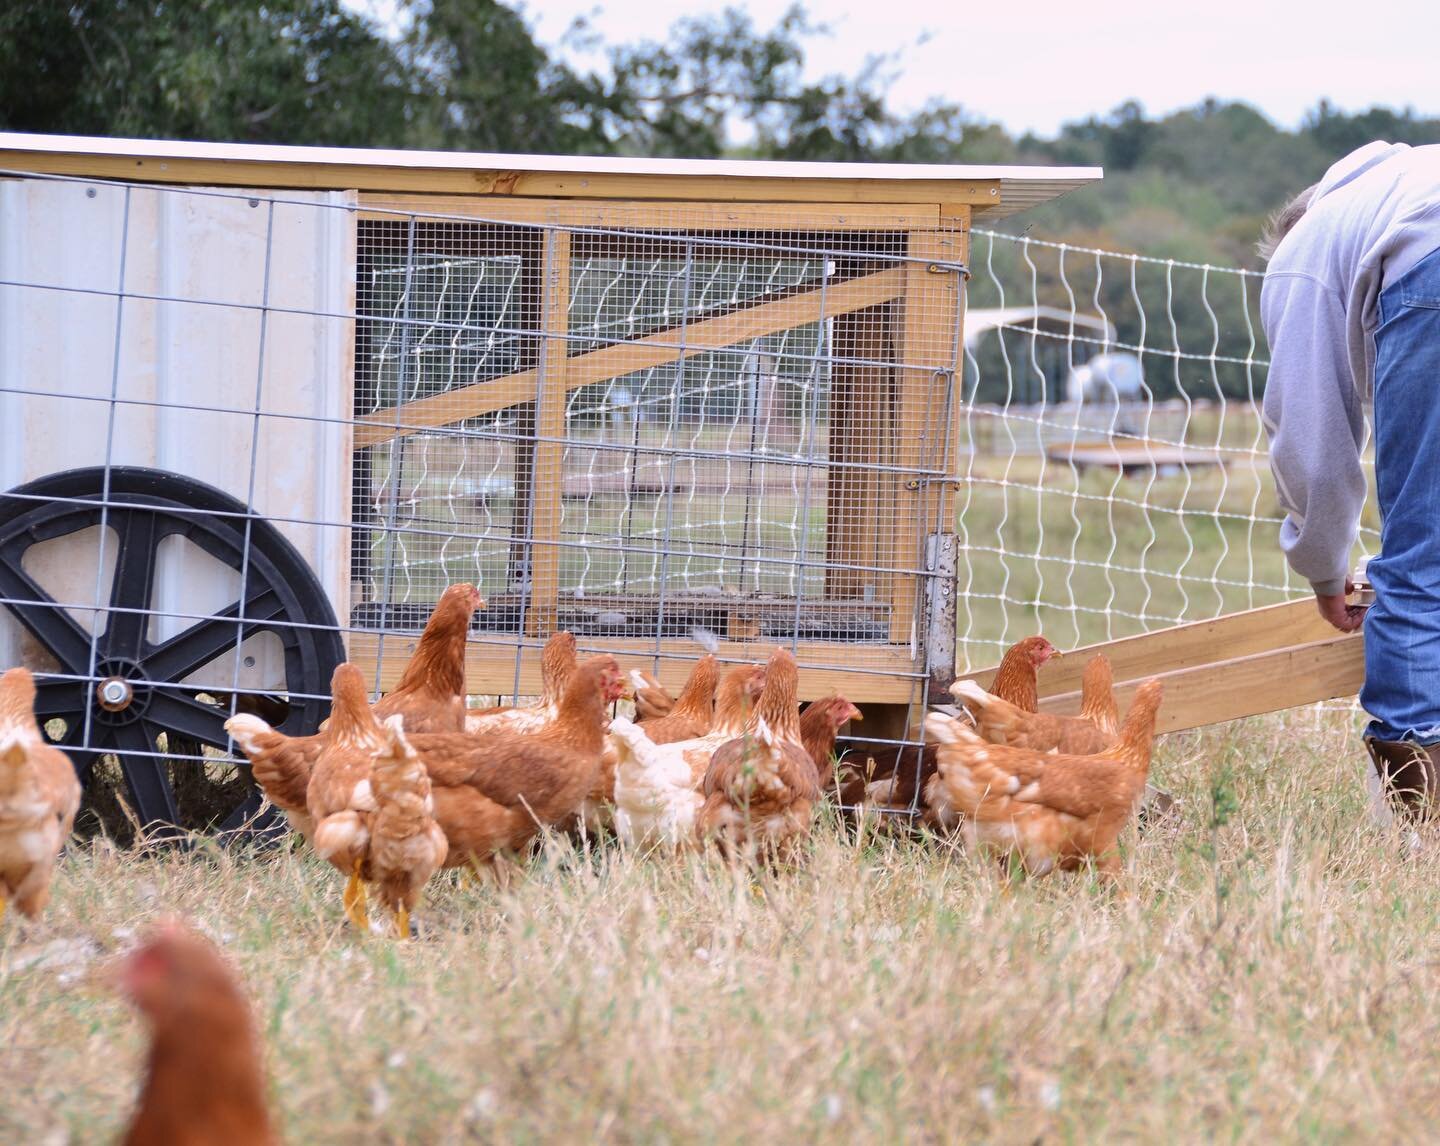 This is what we call a Chick-a-shaw, a mobile home (of sorts) for our Isa Brown laying chickens to sleep in at night. It protects the chickens from predators, provides shade during the day, and allows us to easily move the chickens to fresh grass. Th